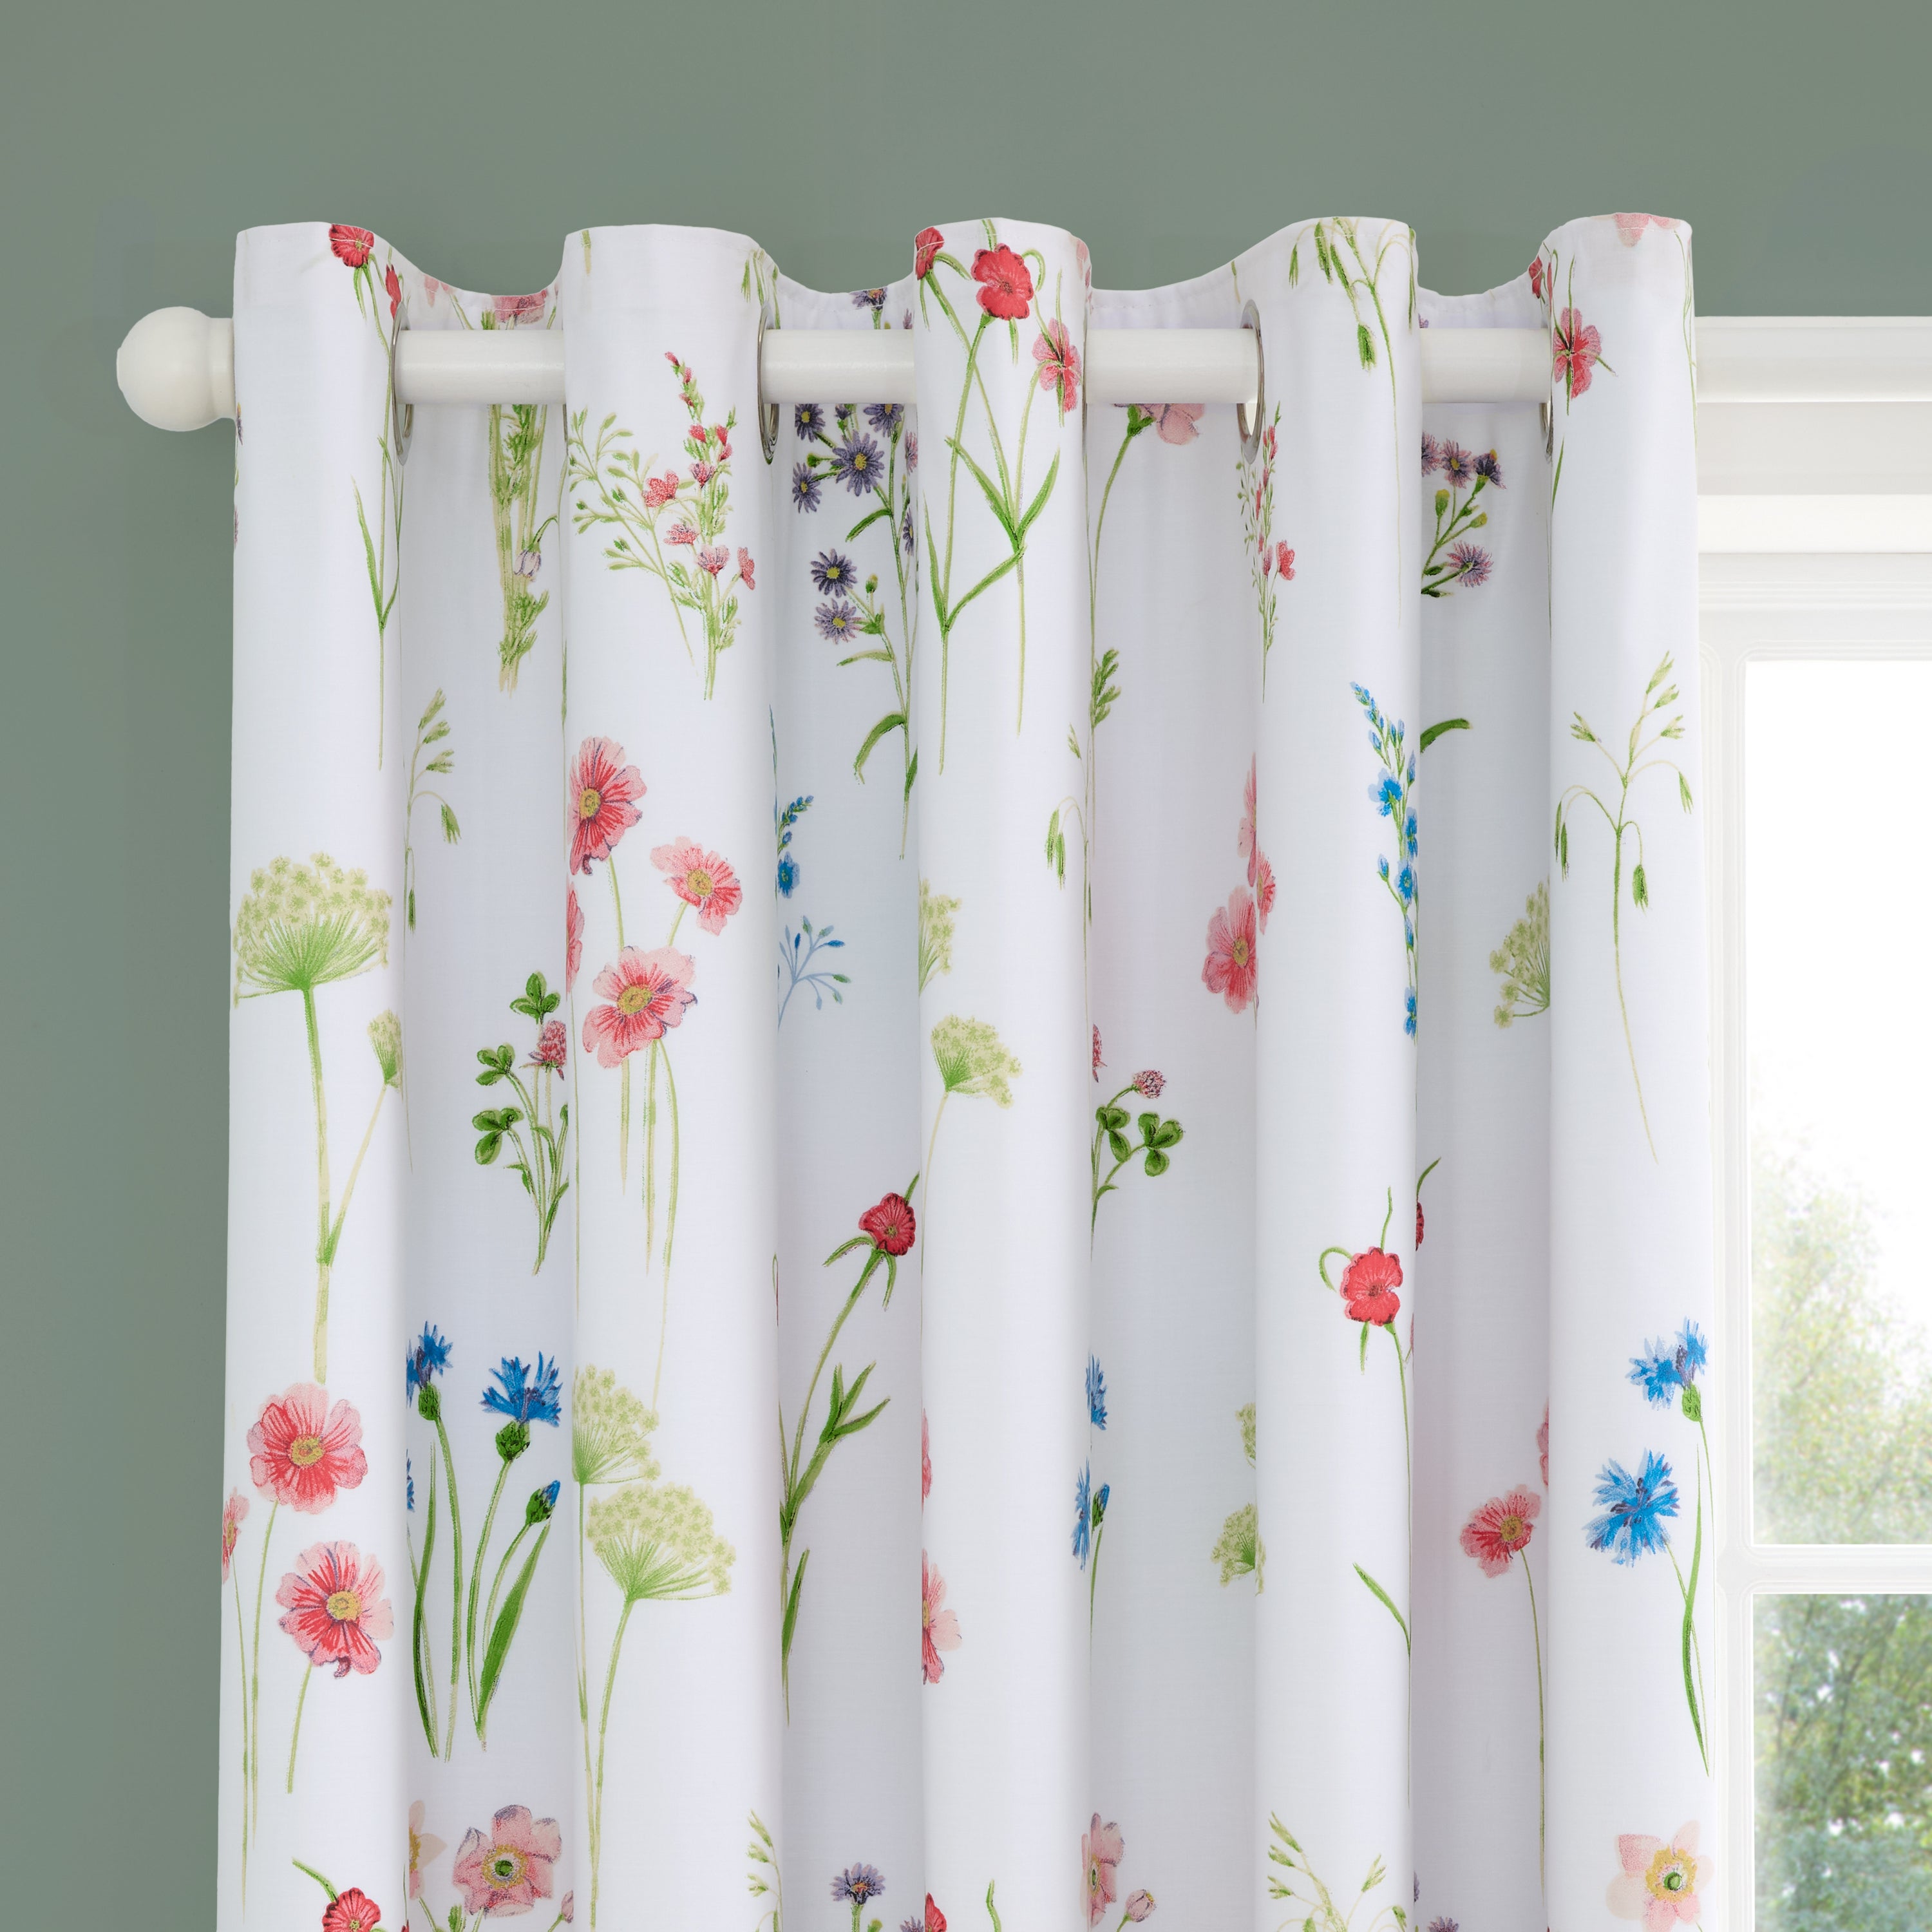 Moxley Meadows Red Blackout Eyelet Curtains